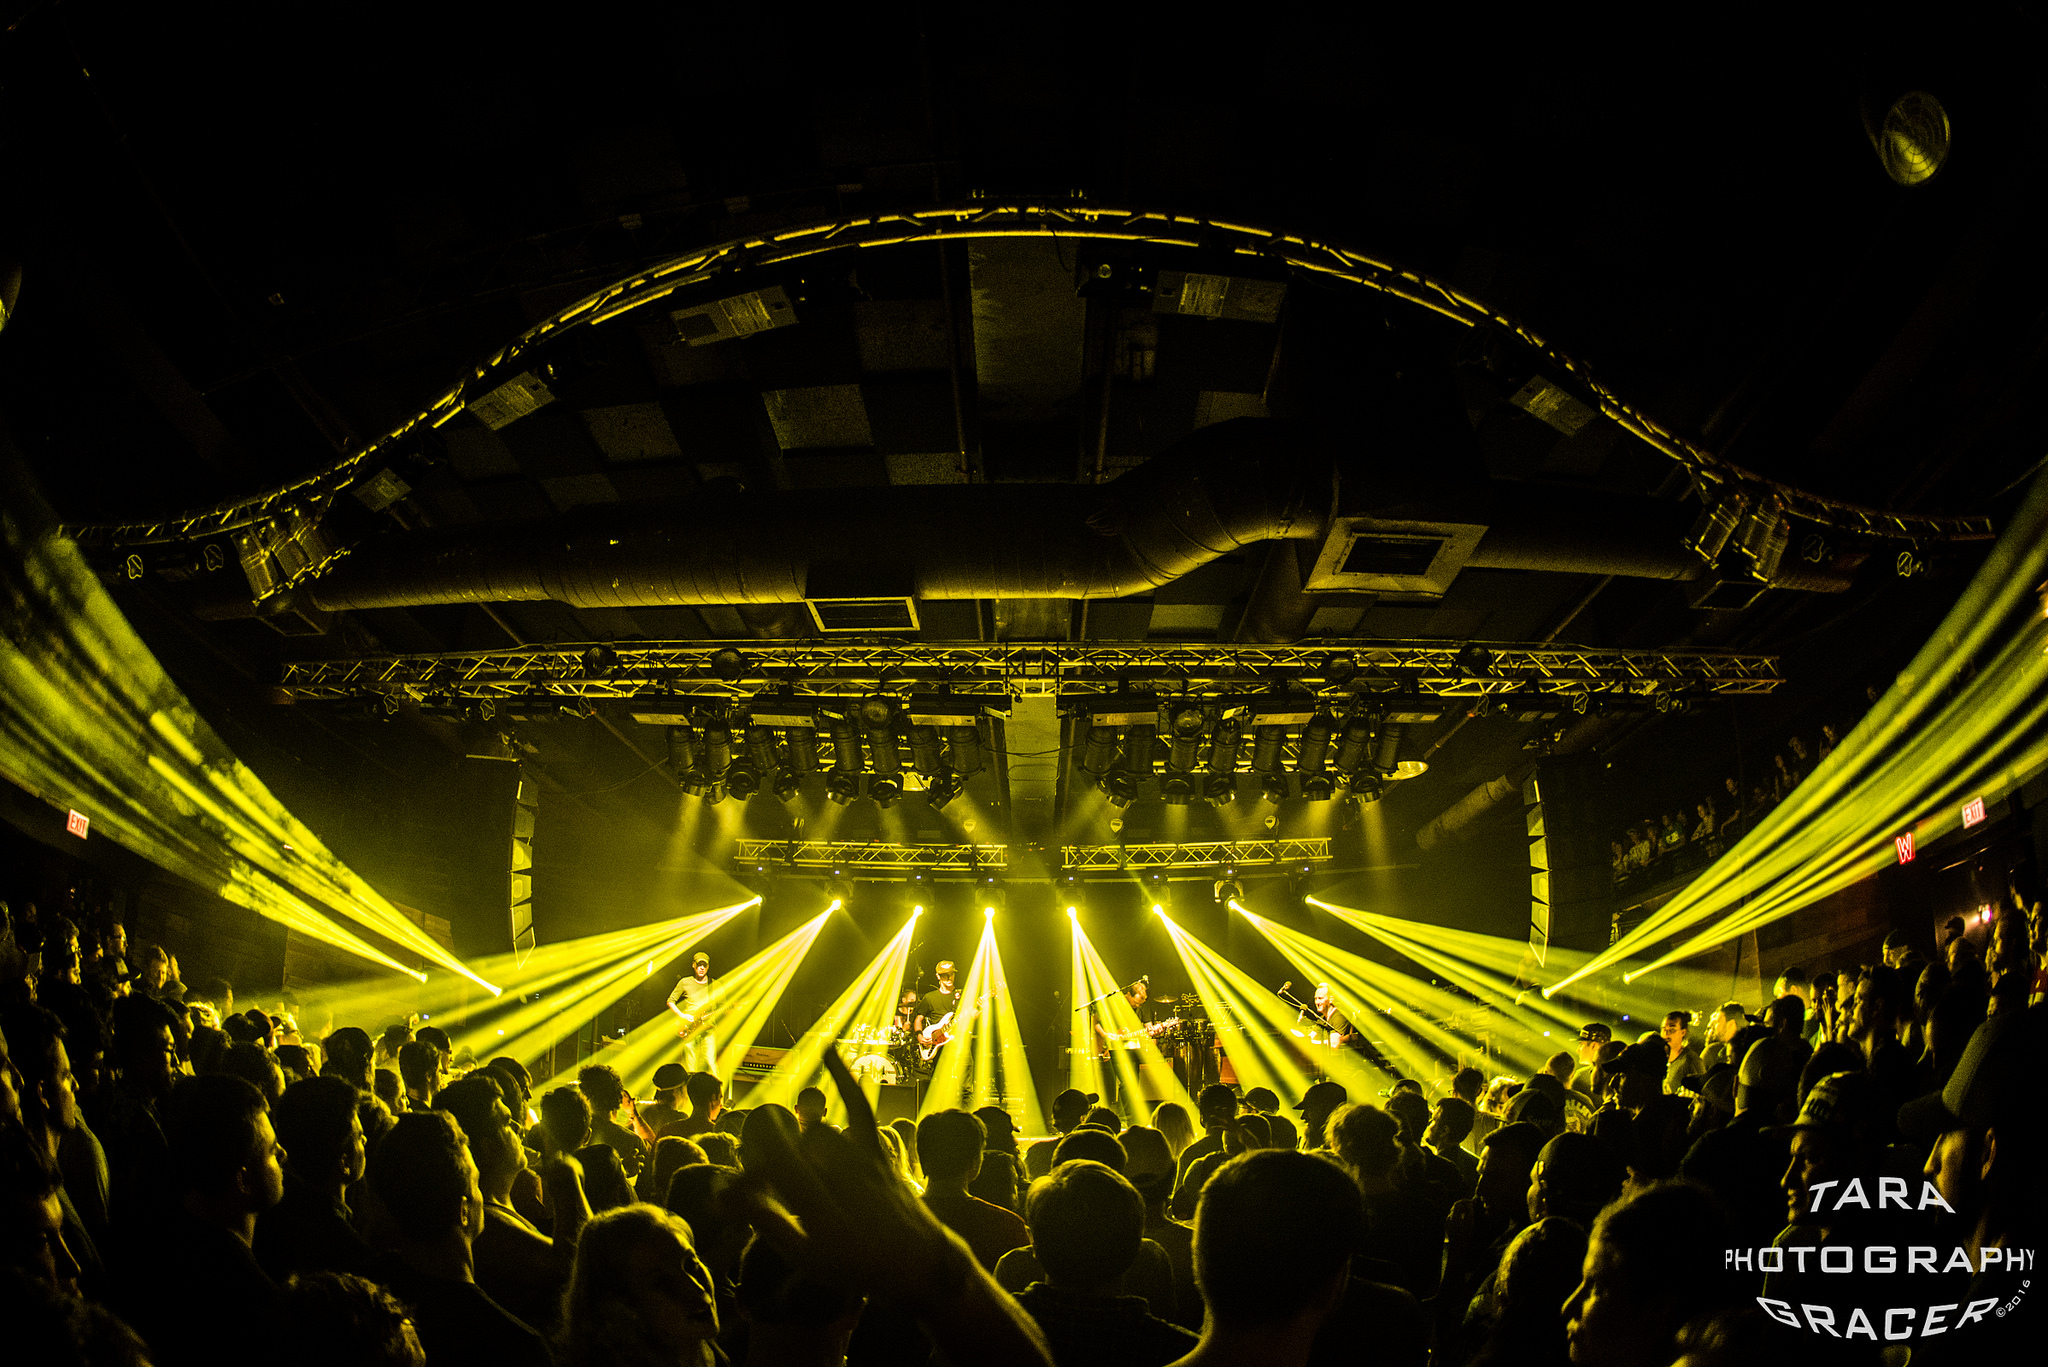 PHOTOS / MEDIA / NEWS | Umphrey's McGee Gives Chicago What It Wants